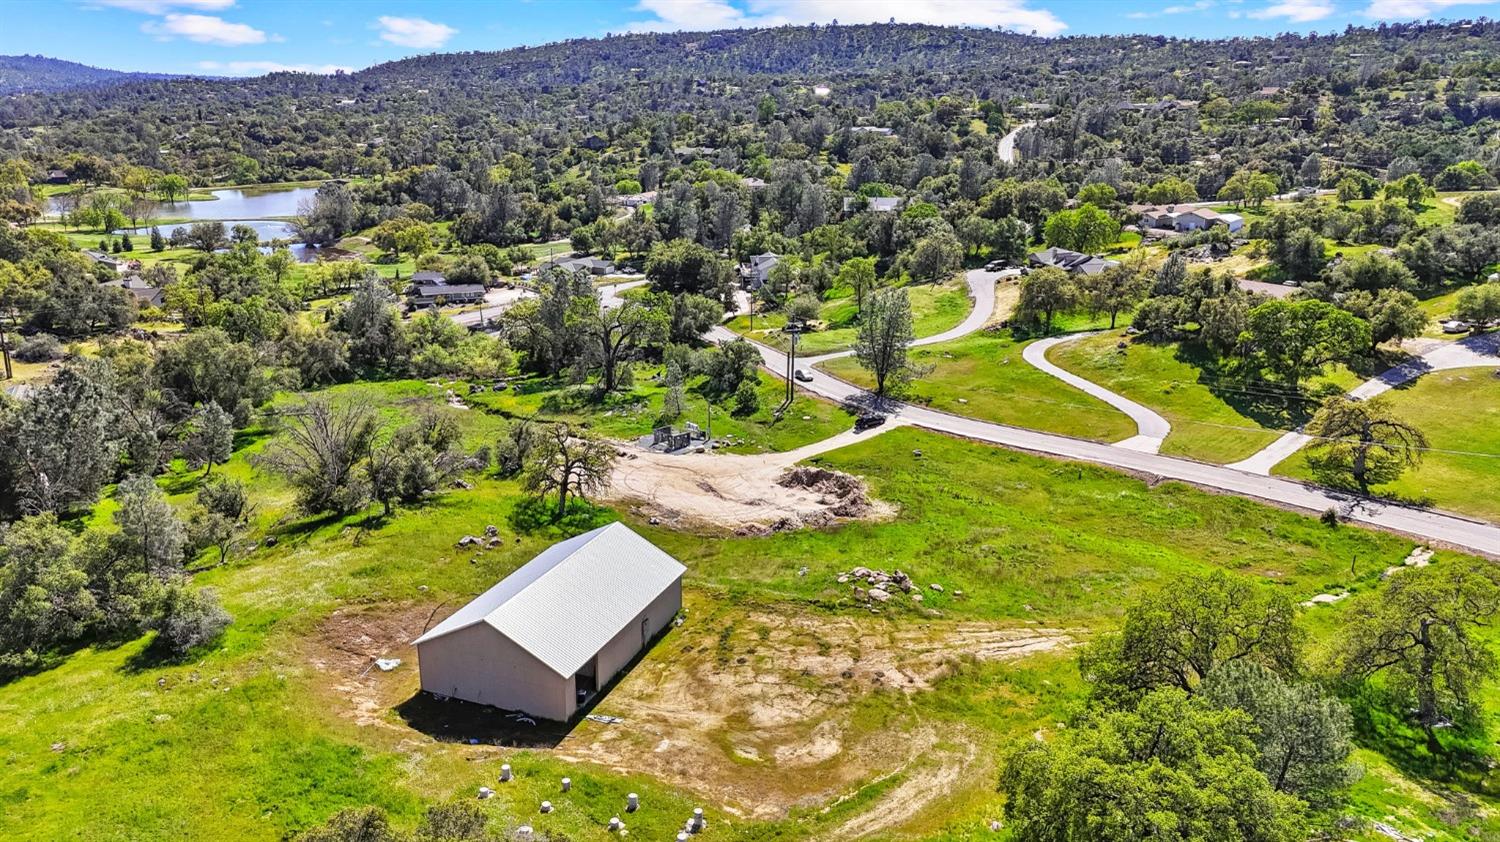 Photo of 62 Ranger Circle Dr in Coarsegold, CA